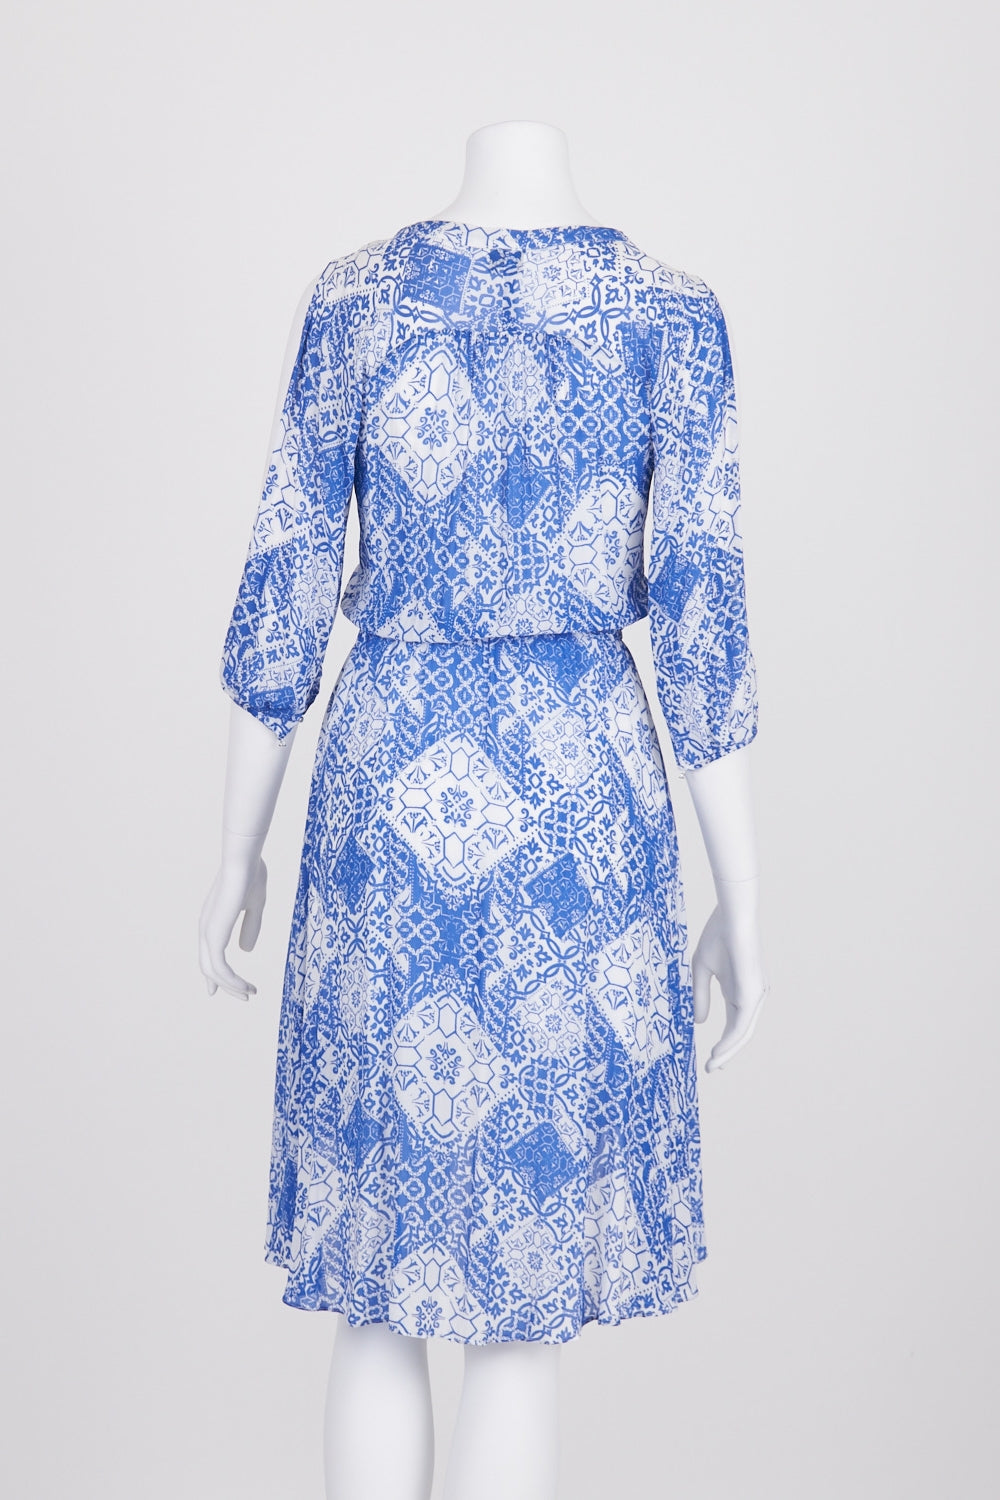 Witchery Blue And White Patterned Dress 4